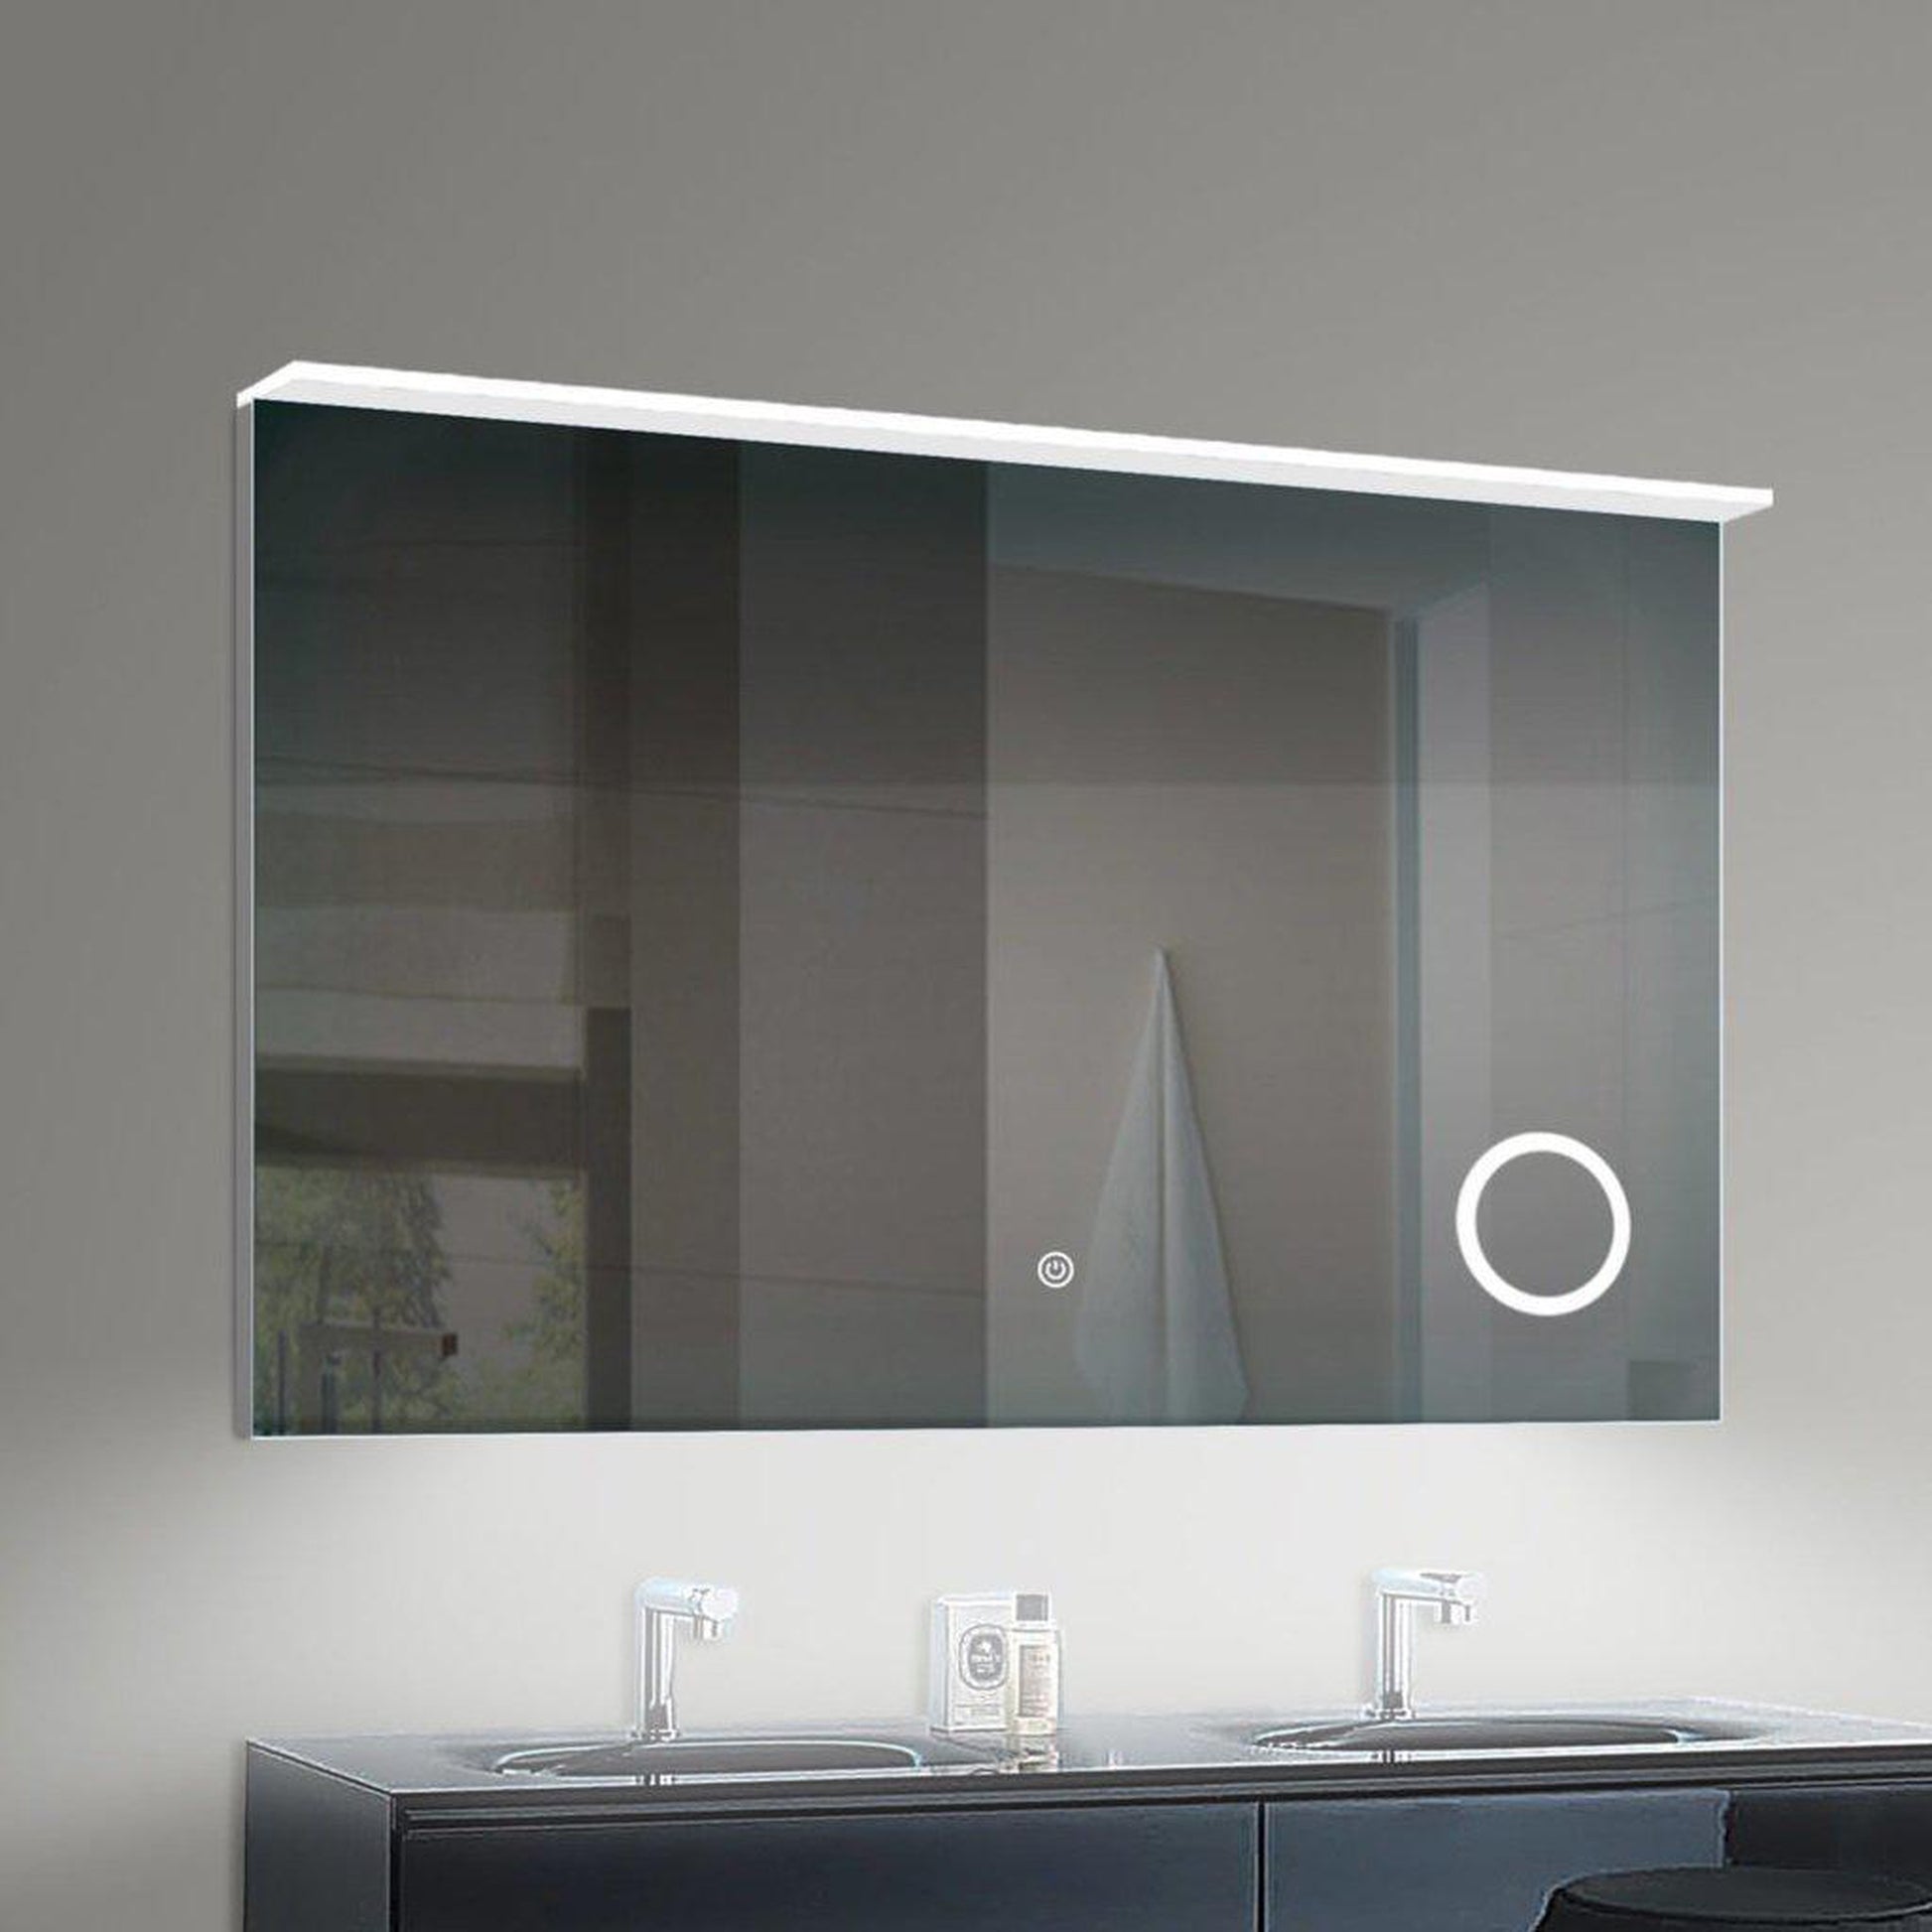 Lighted Impressions Transit 48" x 24" Rectangular Frameless Wall-Mounted LED Mirror With Touch Sensor, 3X Magnifier & Mirrored Sides